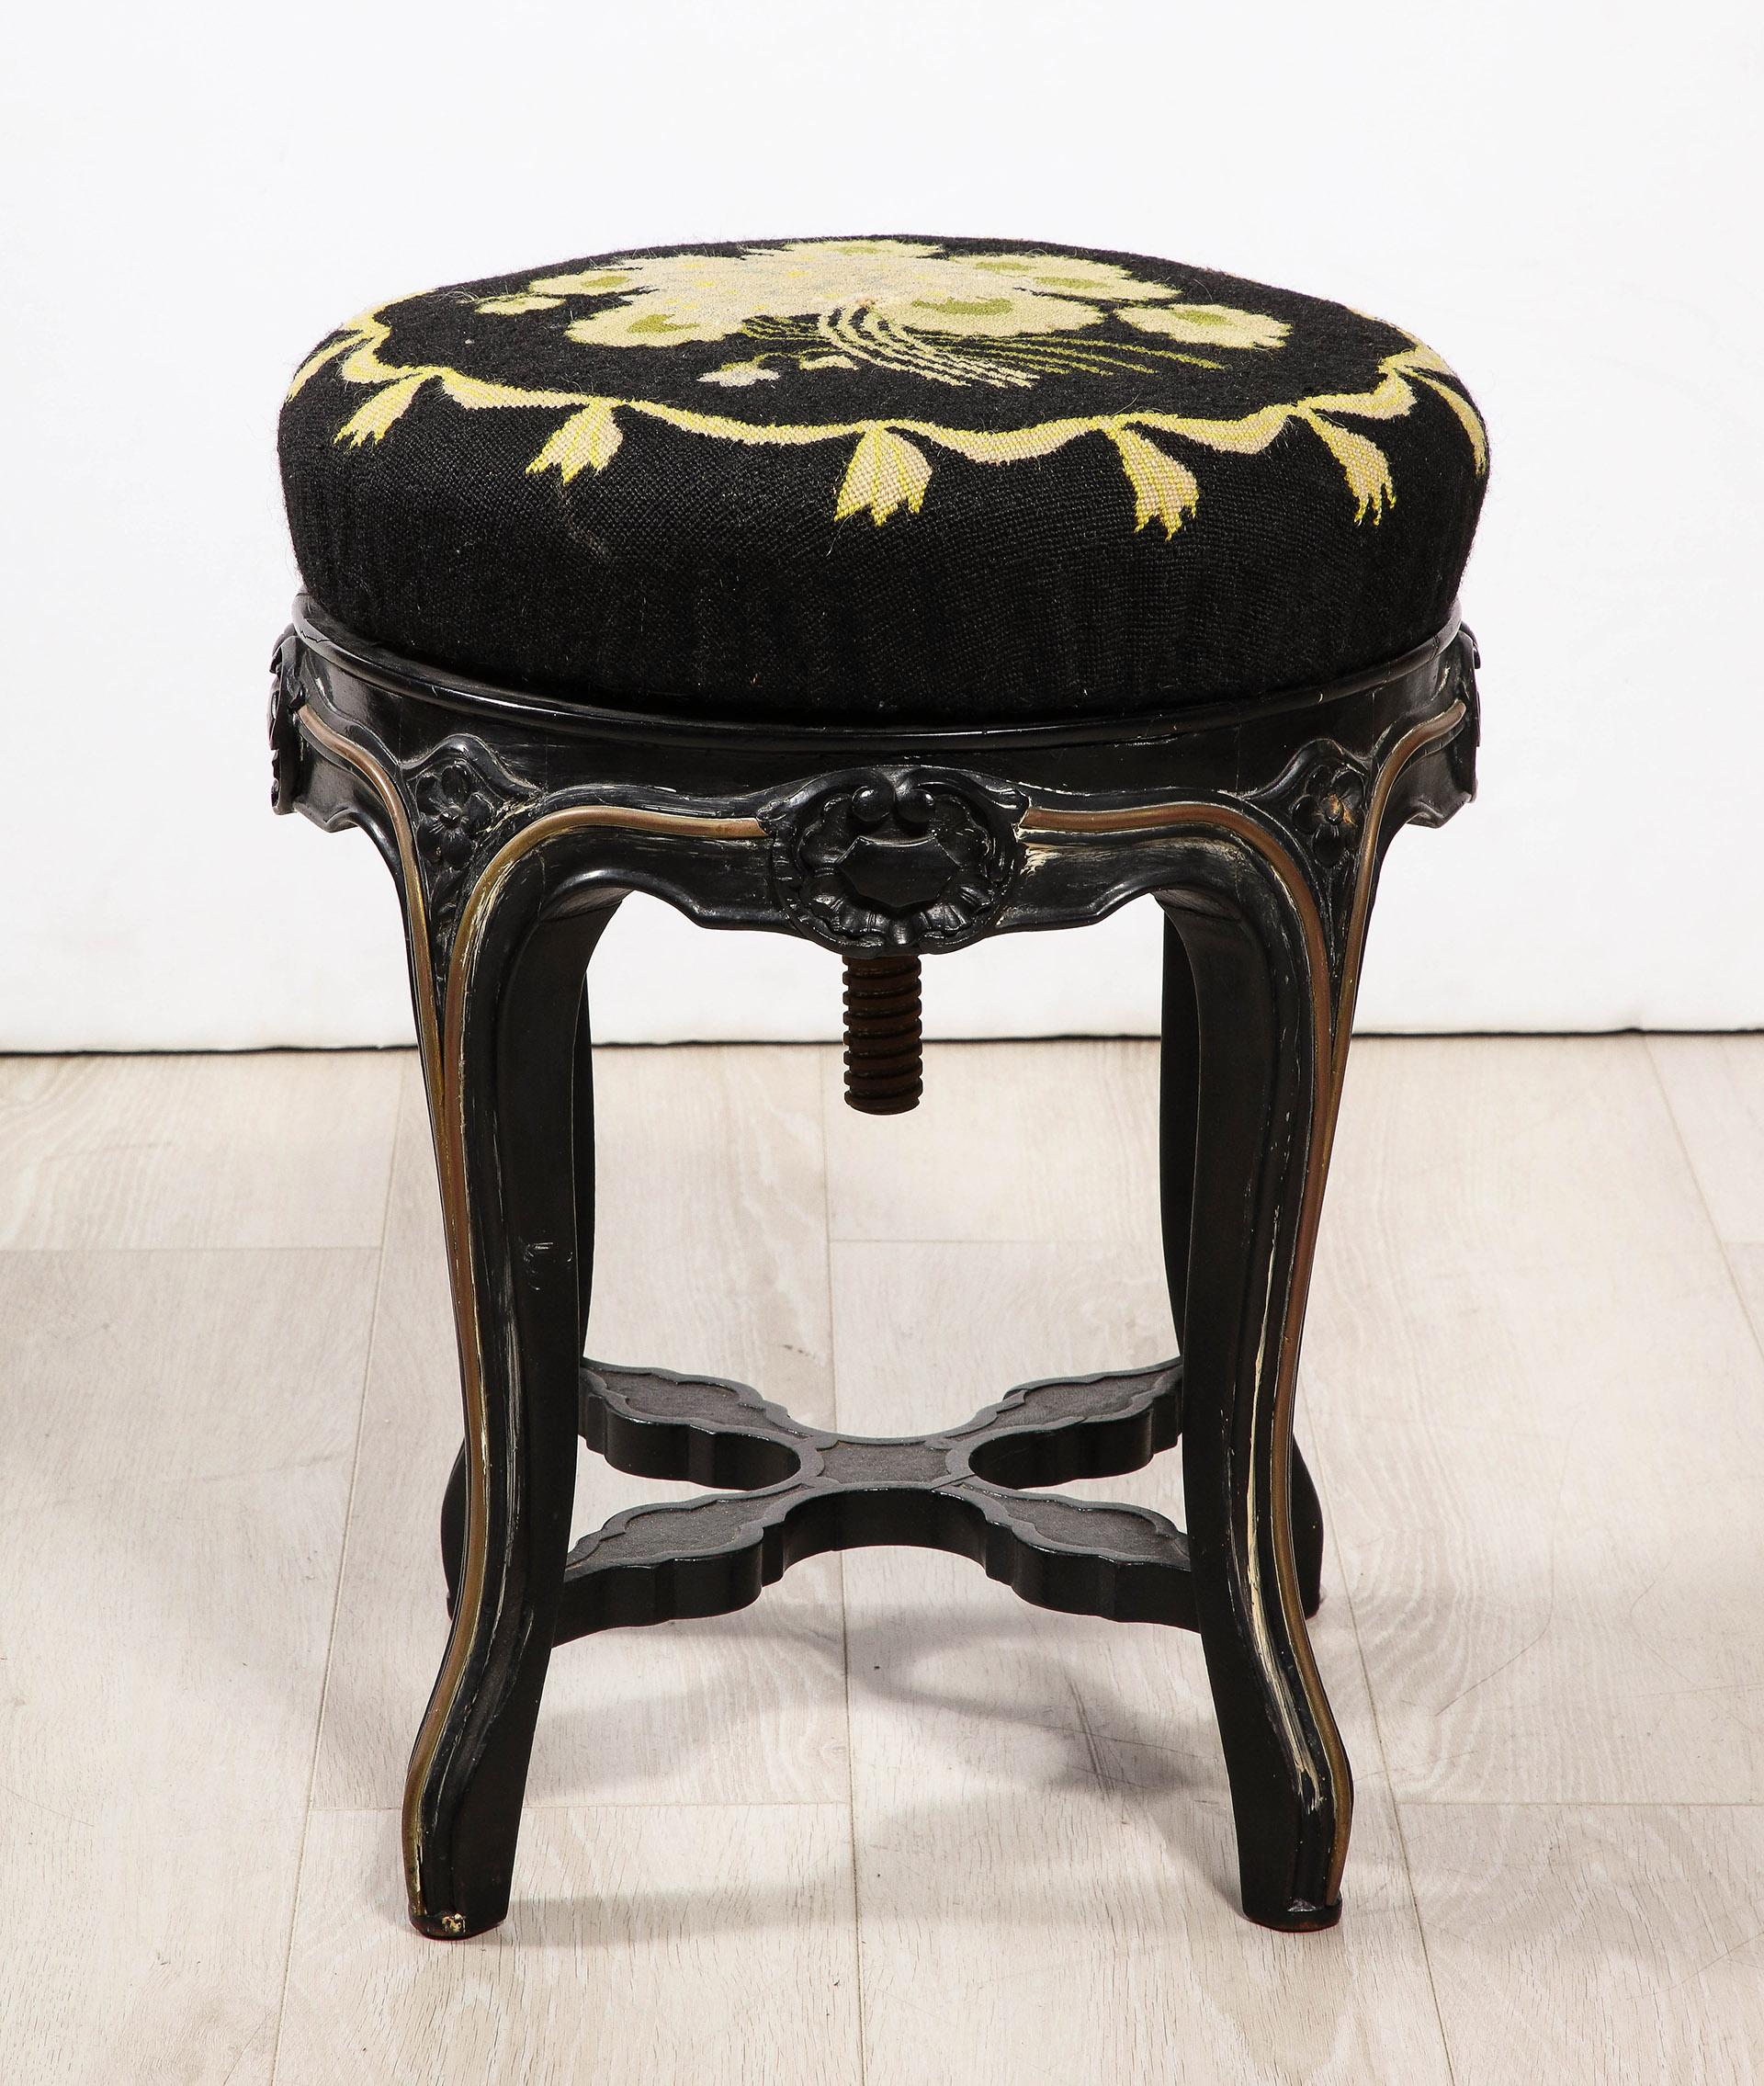 Having an early needle point upholstered seat which can be turned to adjust height. The elegantly carved frame with an ebonized and gilded finish.